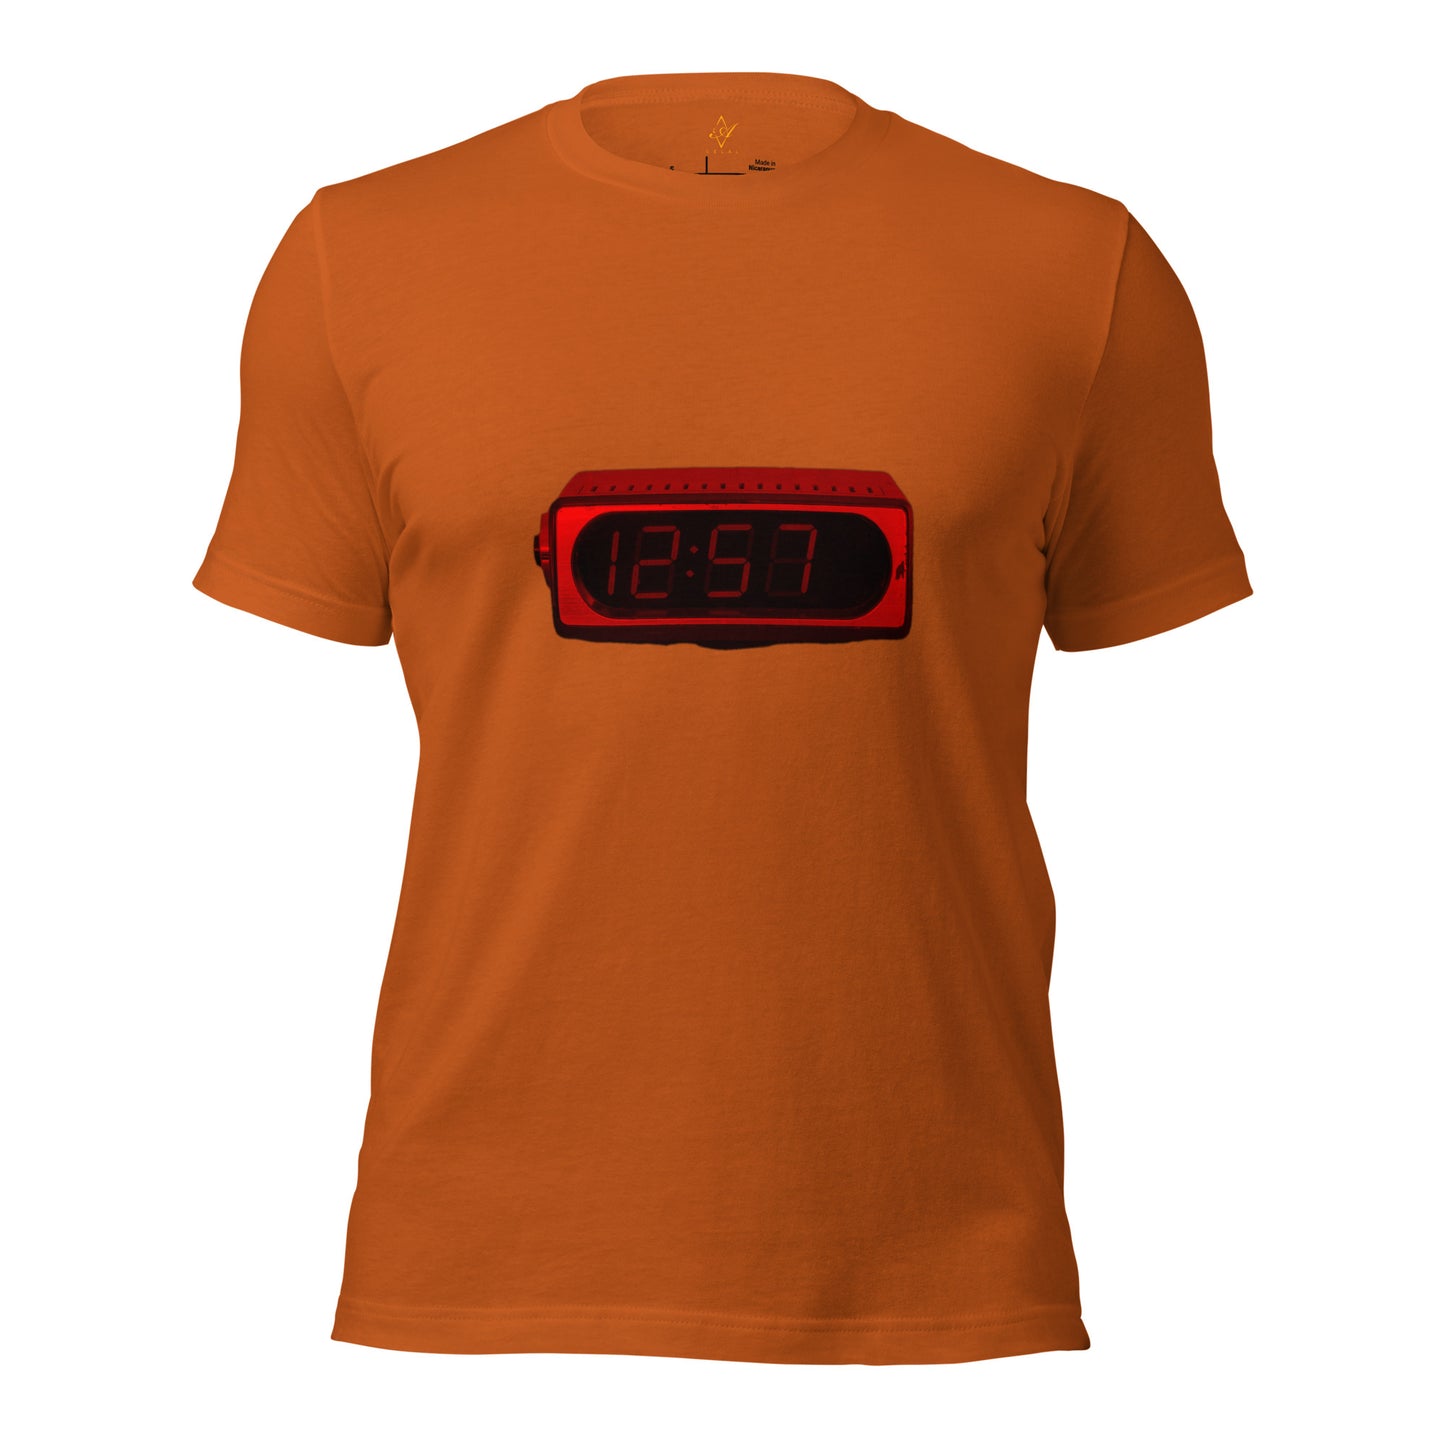 Limited Edition 1257 Unisex t-shirt